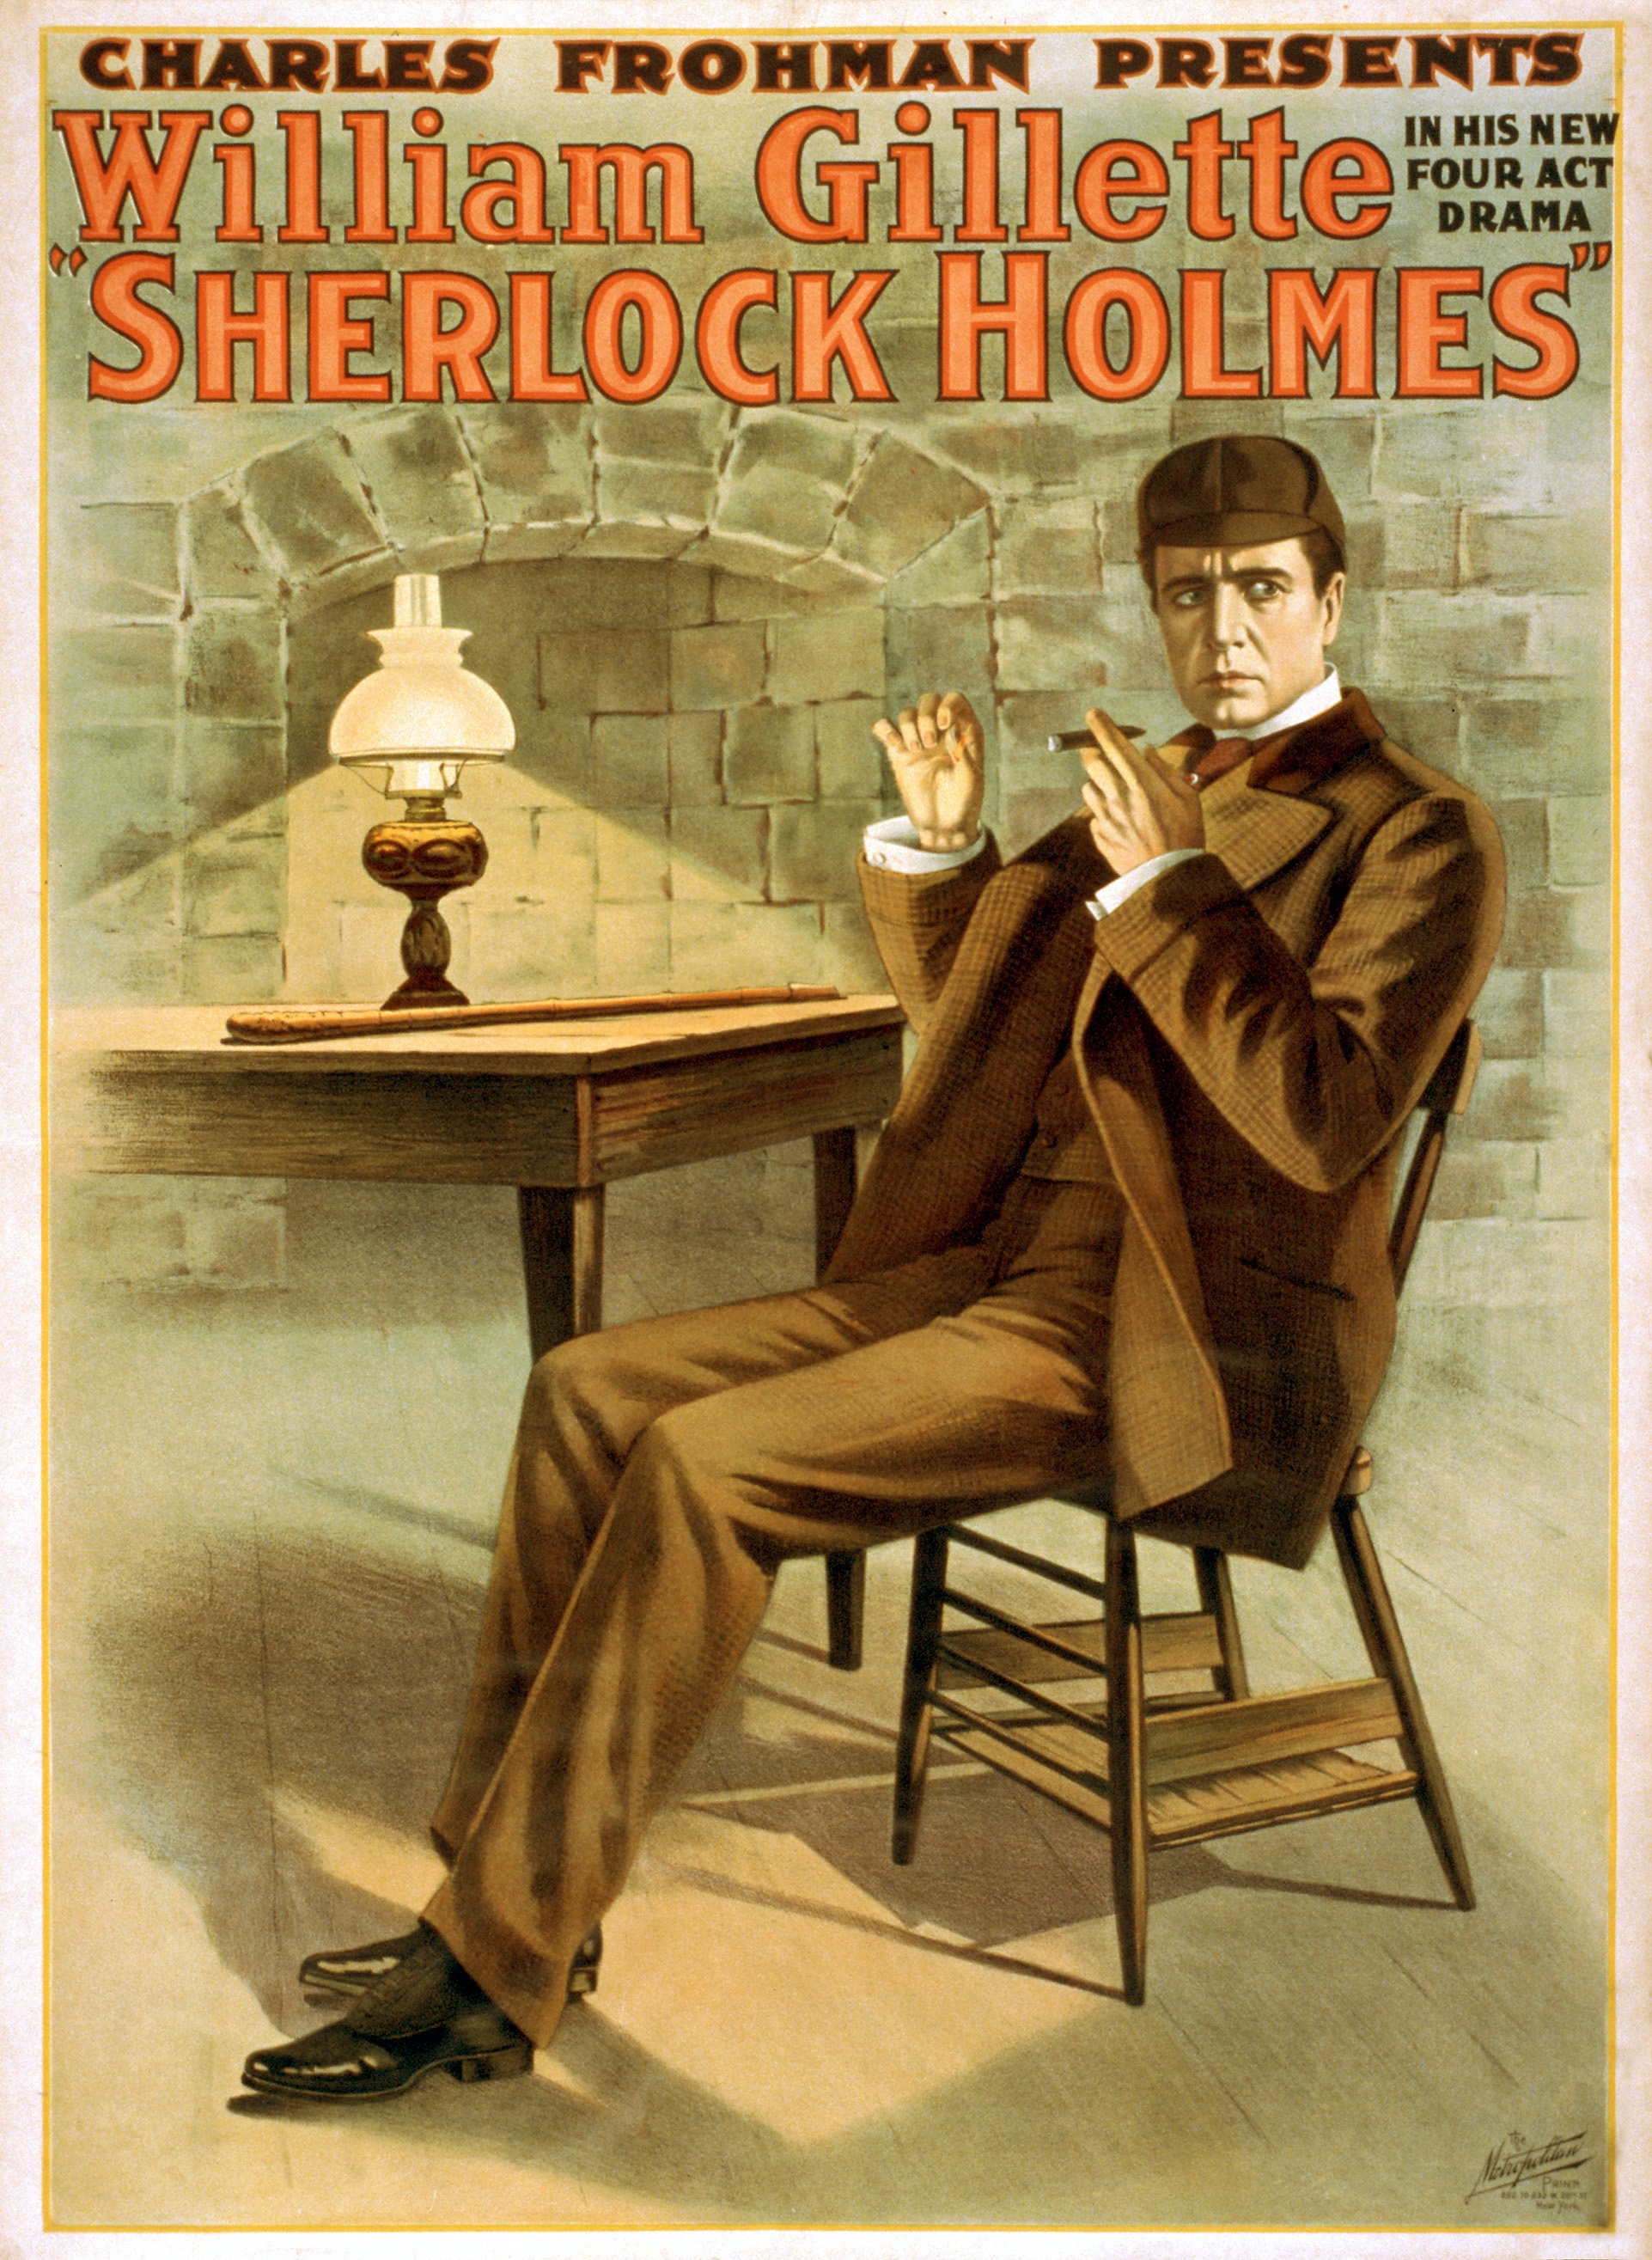  - charles_frohman_presents_william_gillette_in_his_new_four_act_drama_sherlock_holmes_loc_var-1364